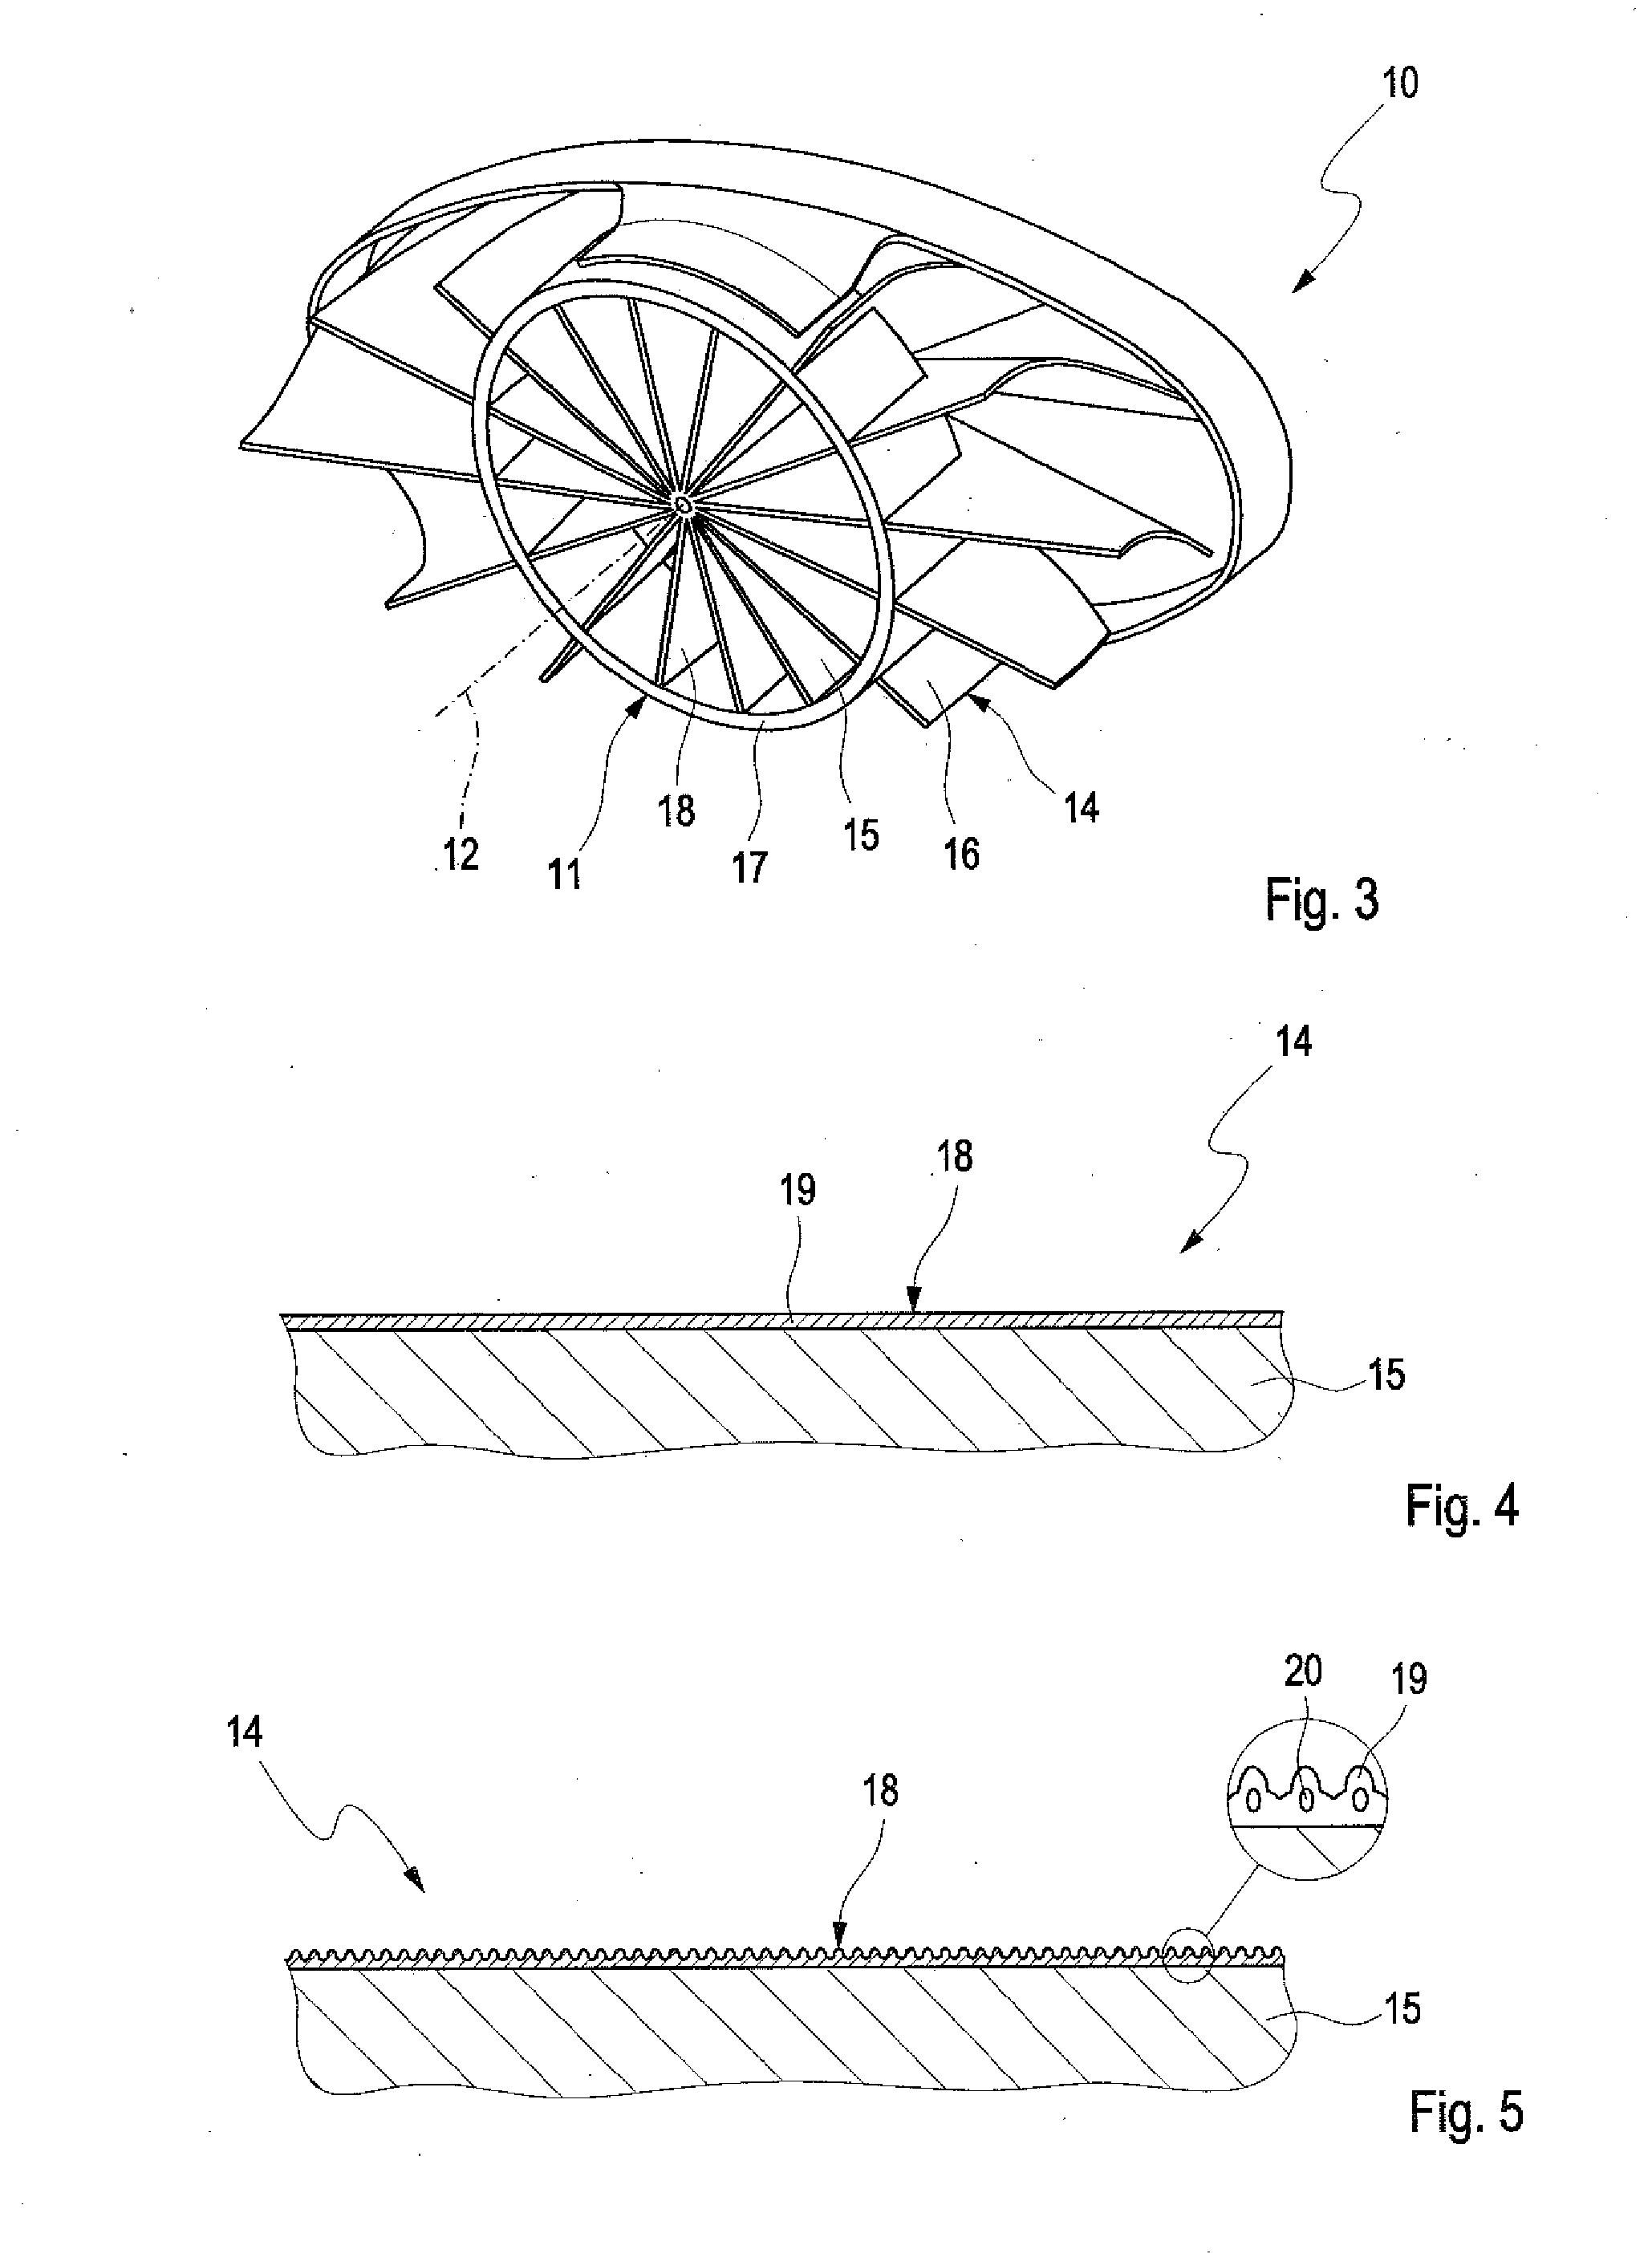 Exhaust system of an internal combustion engine with mixer for a liquid reductant